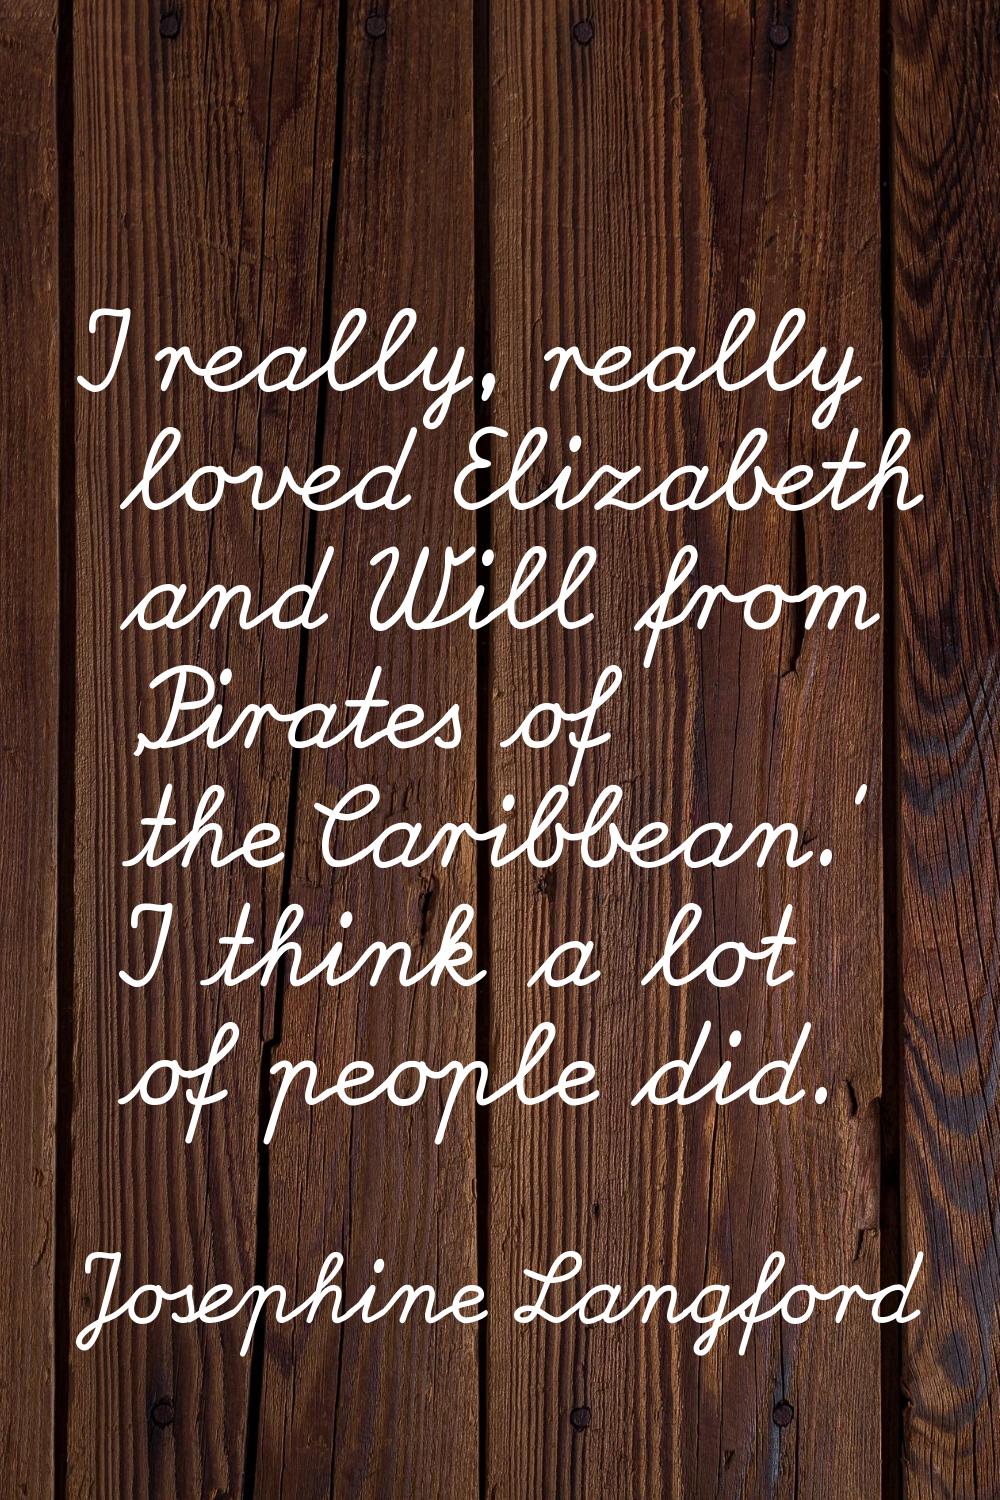 I really, really loved Elizabeth and Will from 'Pirates of the Caribbean.' I think a lot of people 